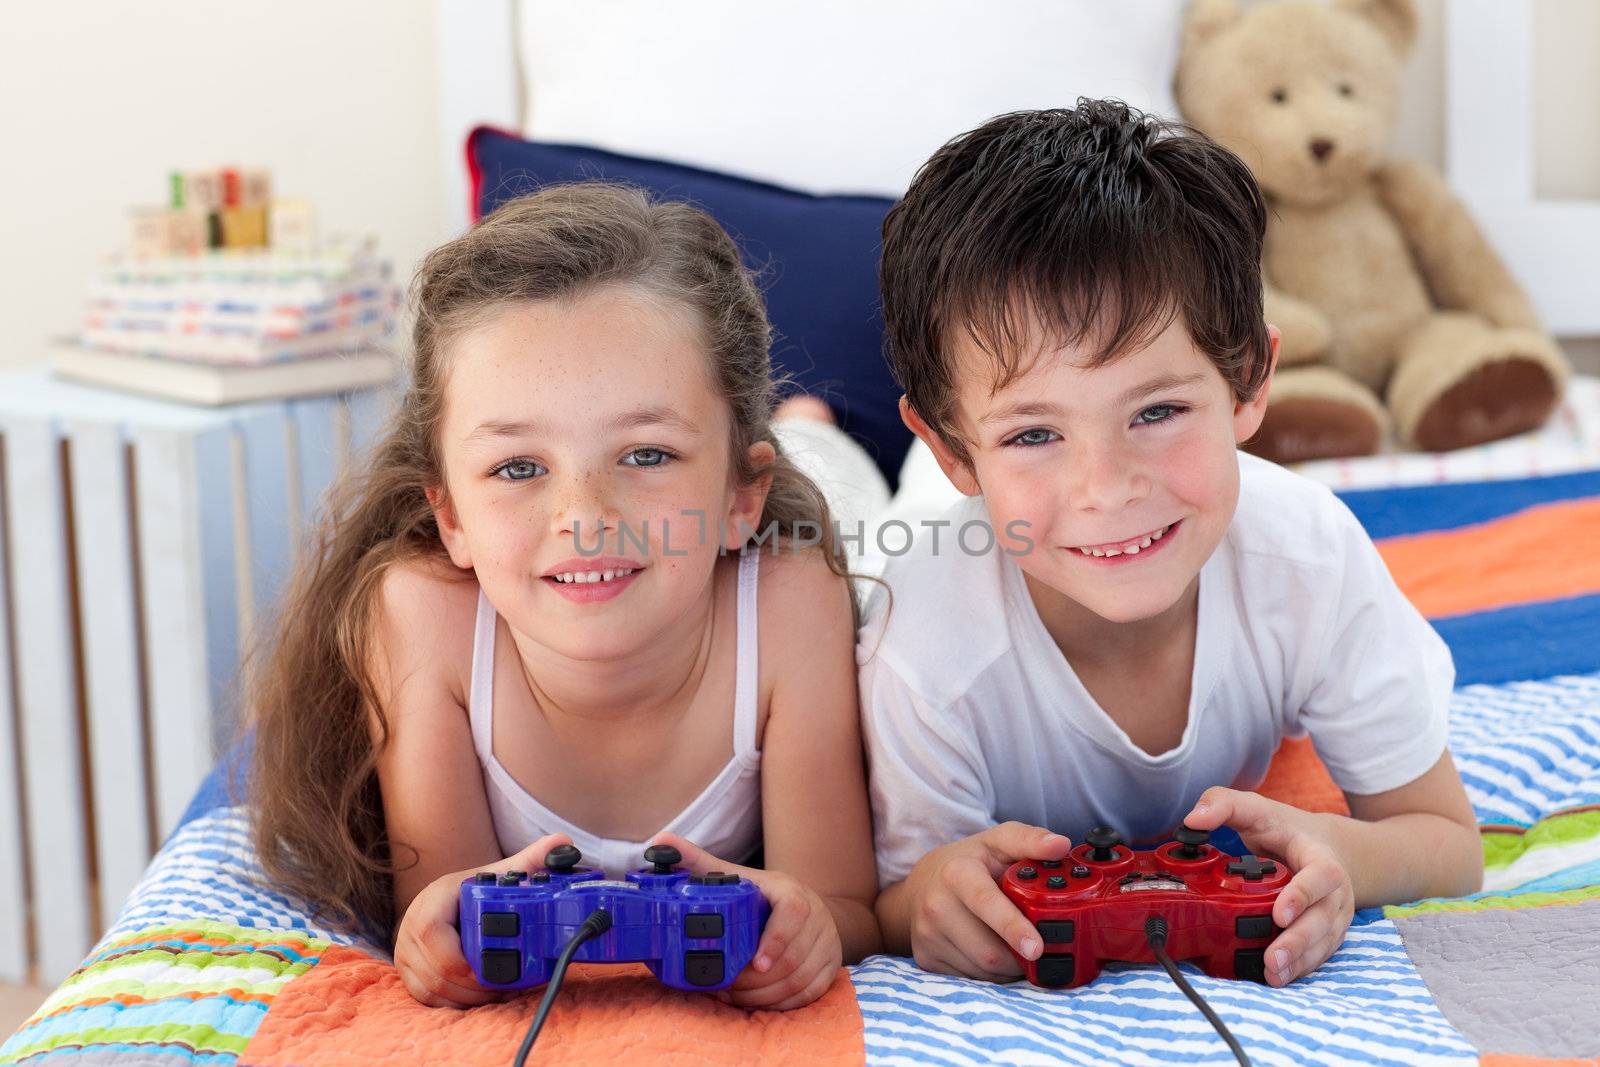 Siblings playing video games together by Wavebreakmedia